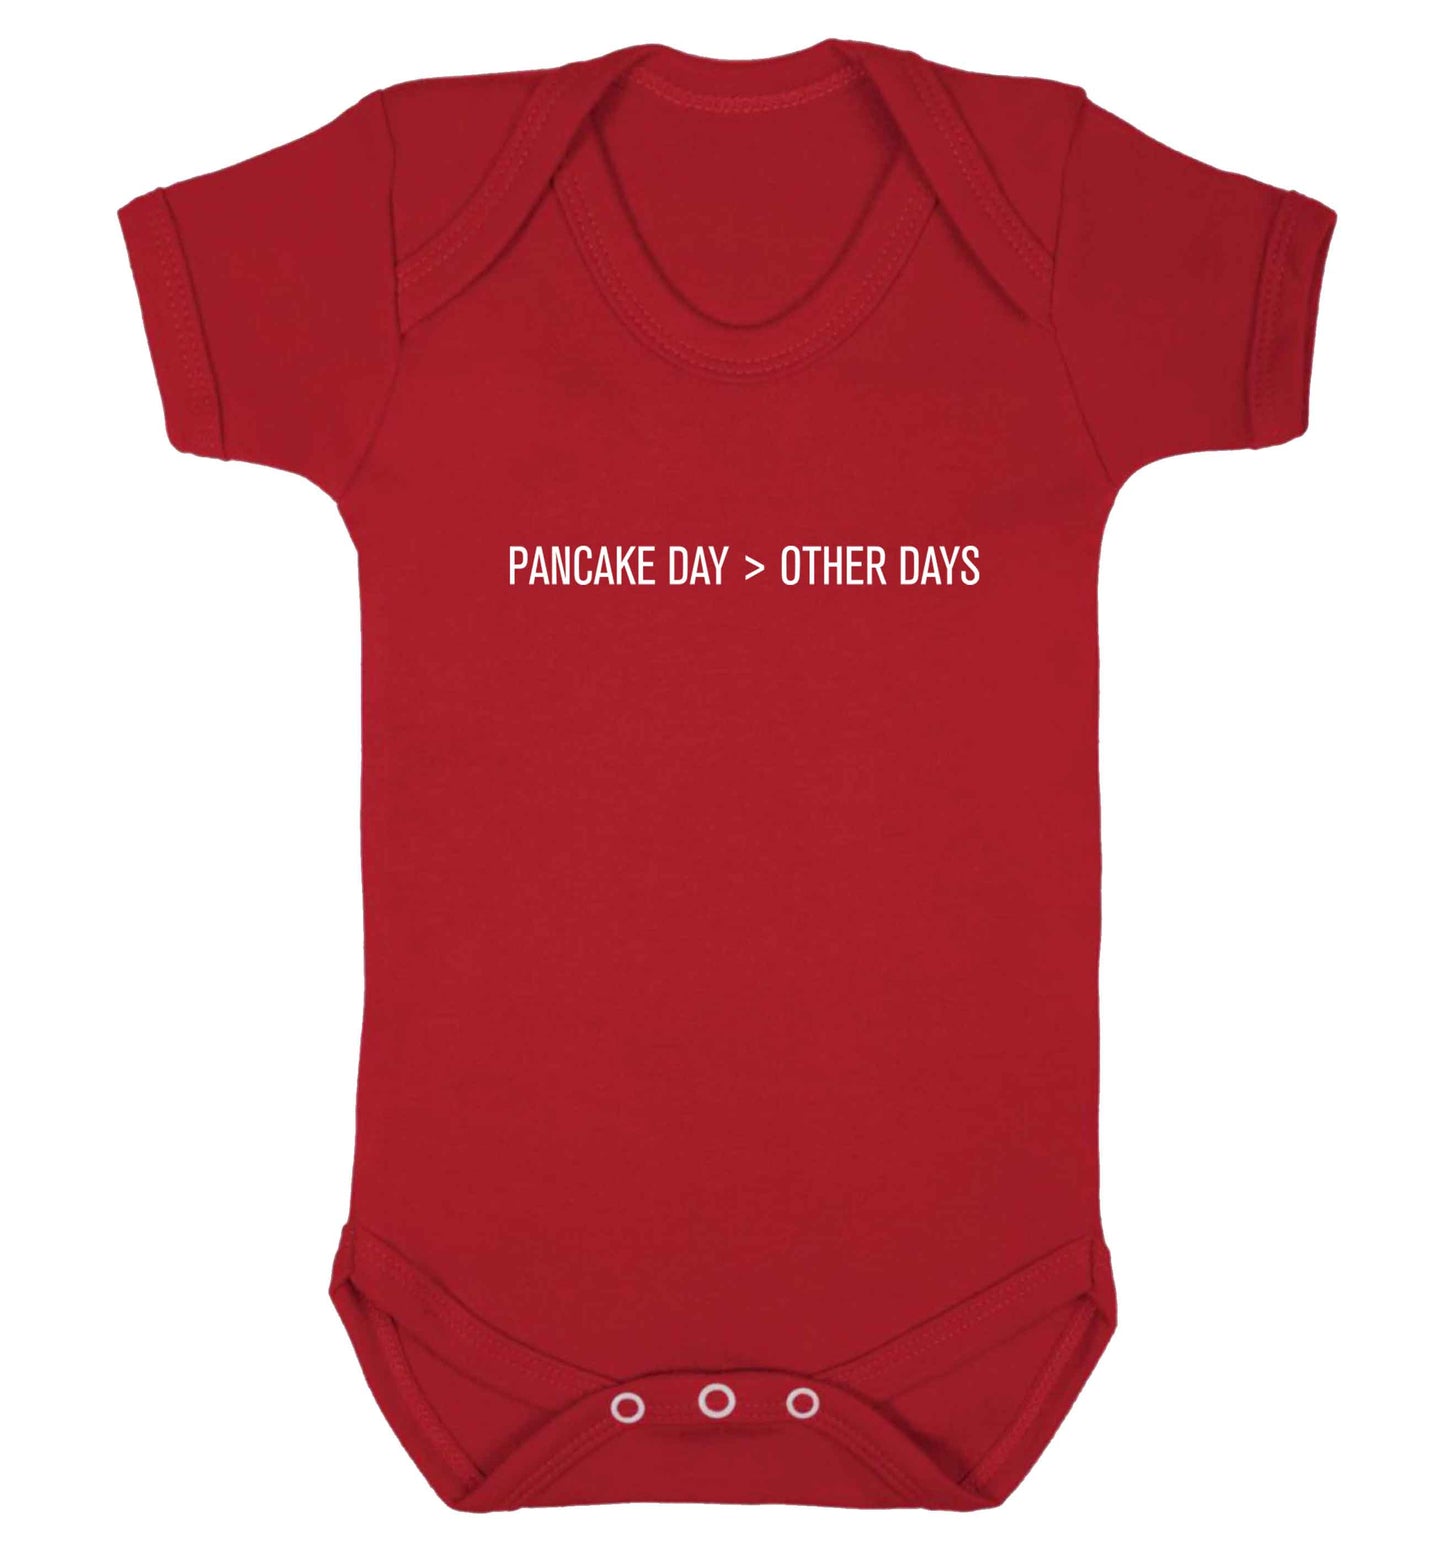 Pancake day > other days baby vest red 18-24 months